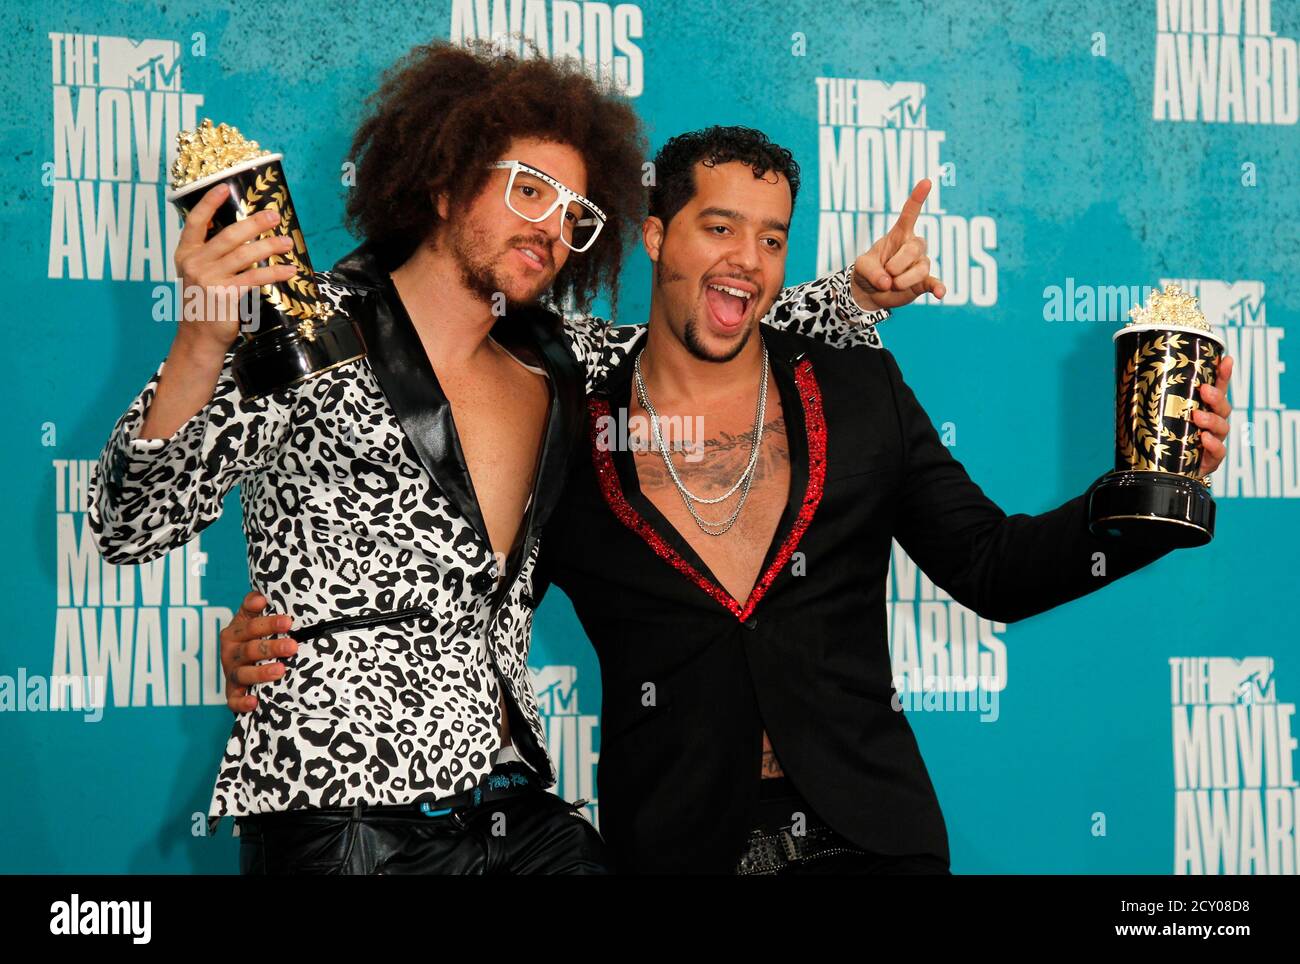 LMFAO pose with their award for best music for "Party Rock Anthem" from the  film "21 Jump Street" at the 2012 MTV Movie Awards in Los Angeles June 3,  2012. REUTERS/Danny Moloshok (